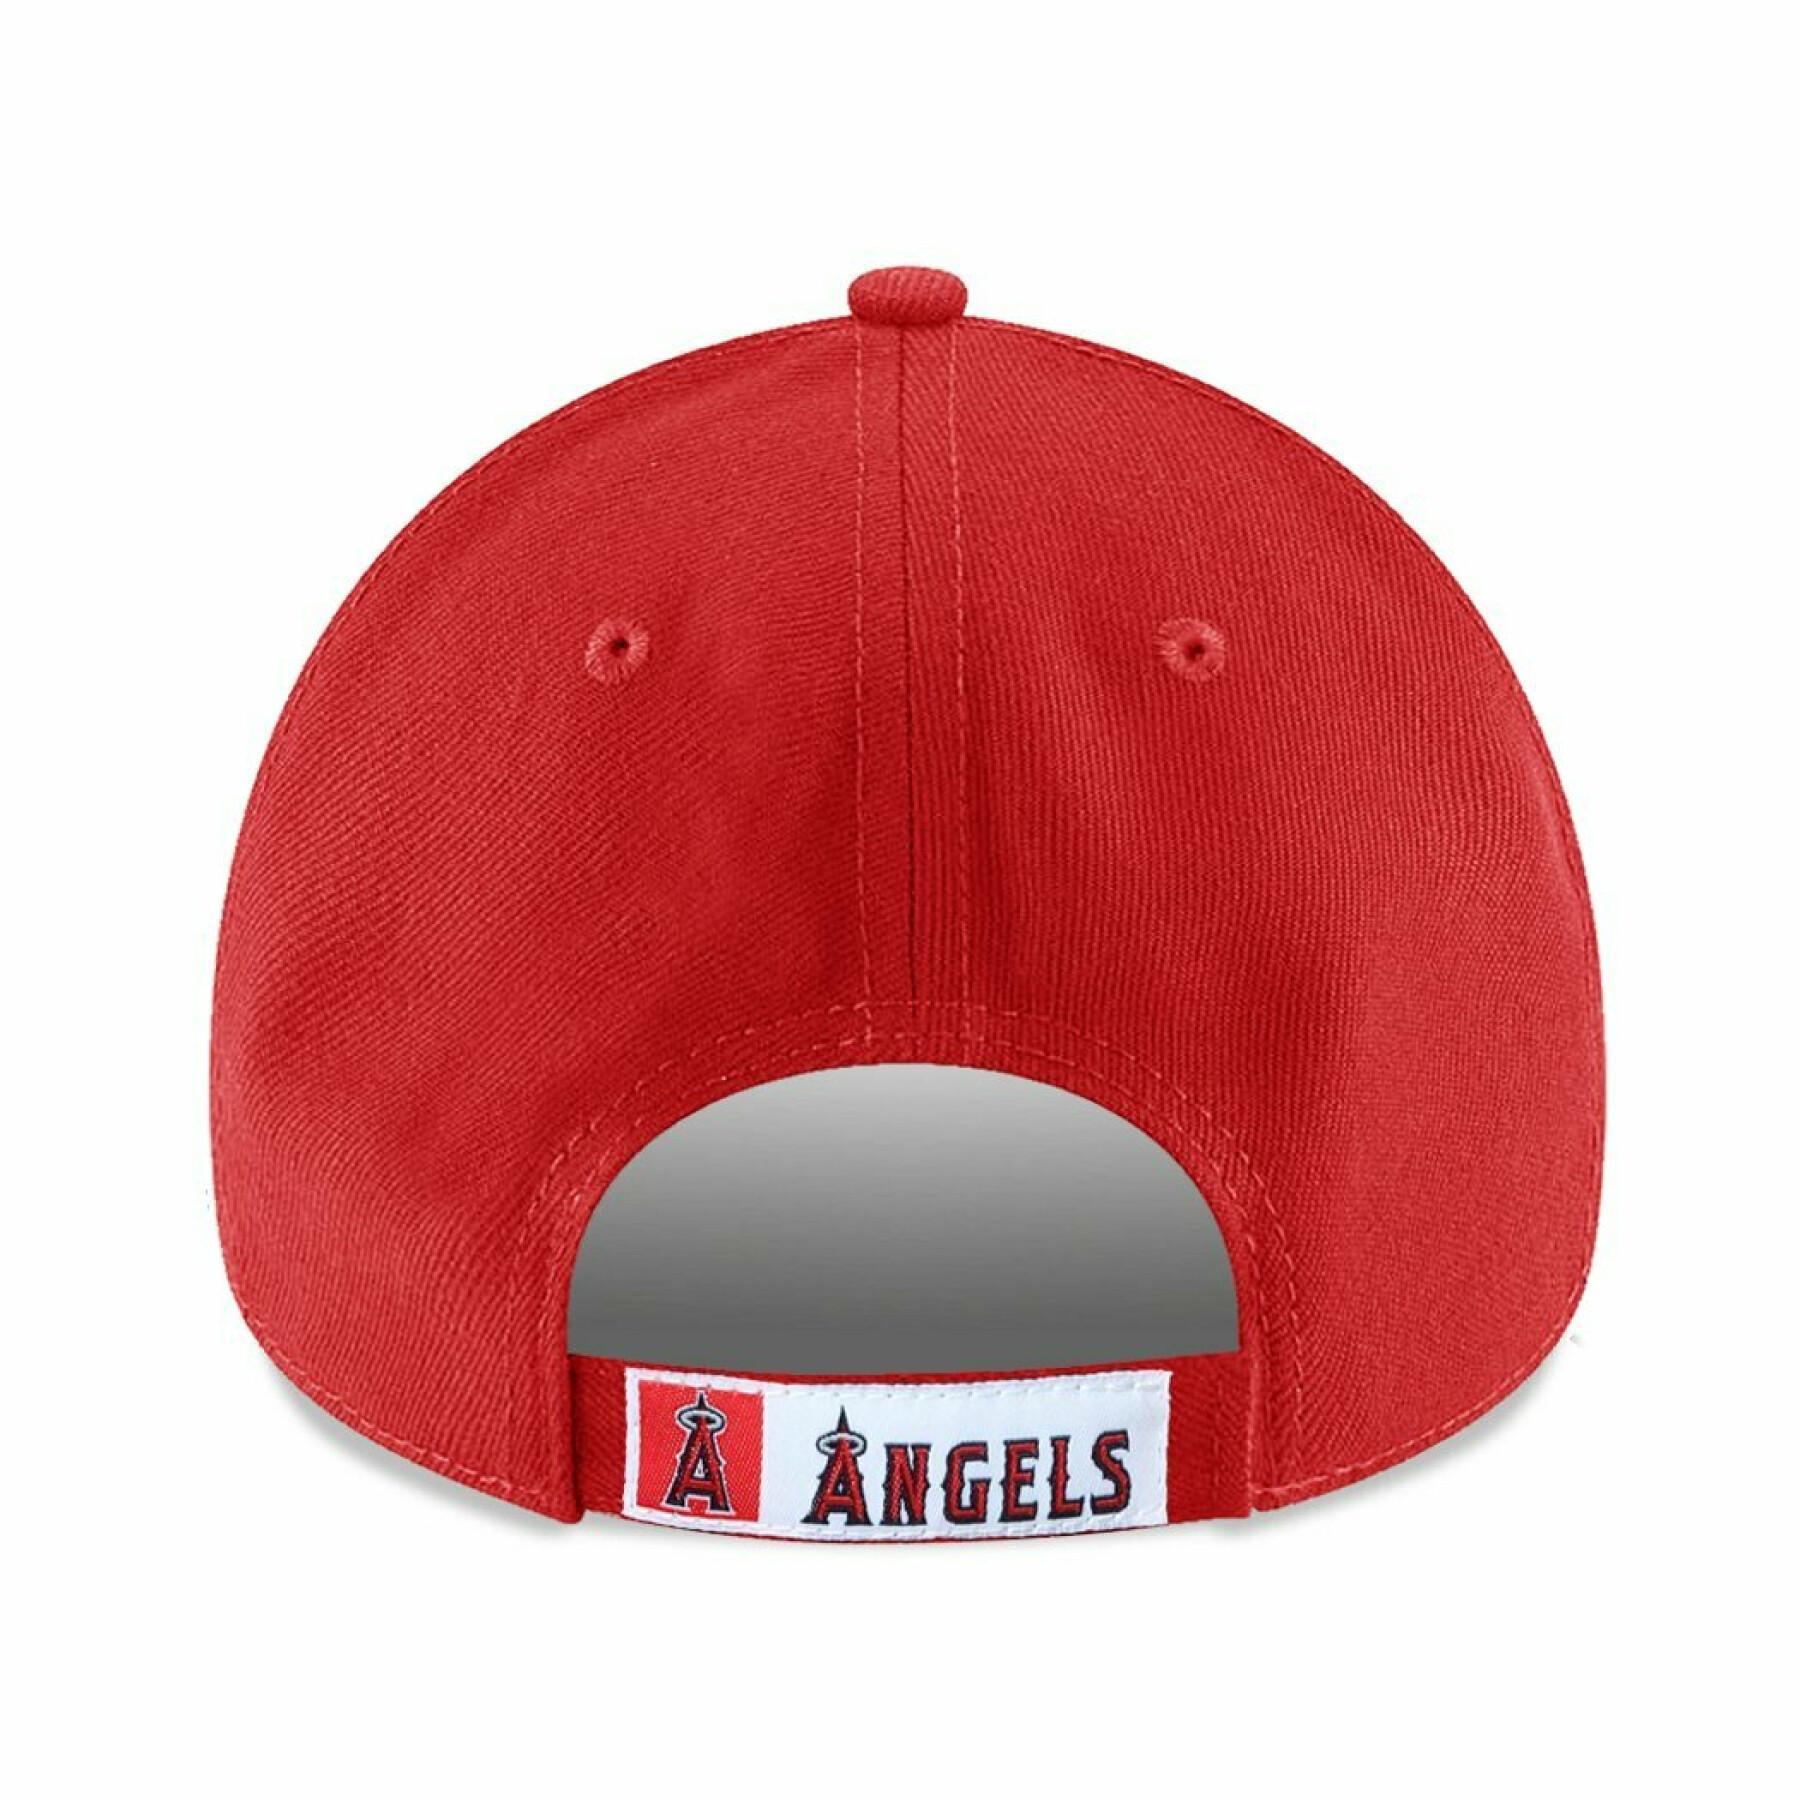 Gorra New Era  9forty The League Anaang Gm 18 Anaheim Angels